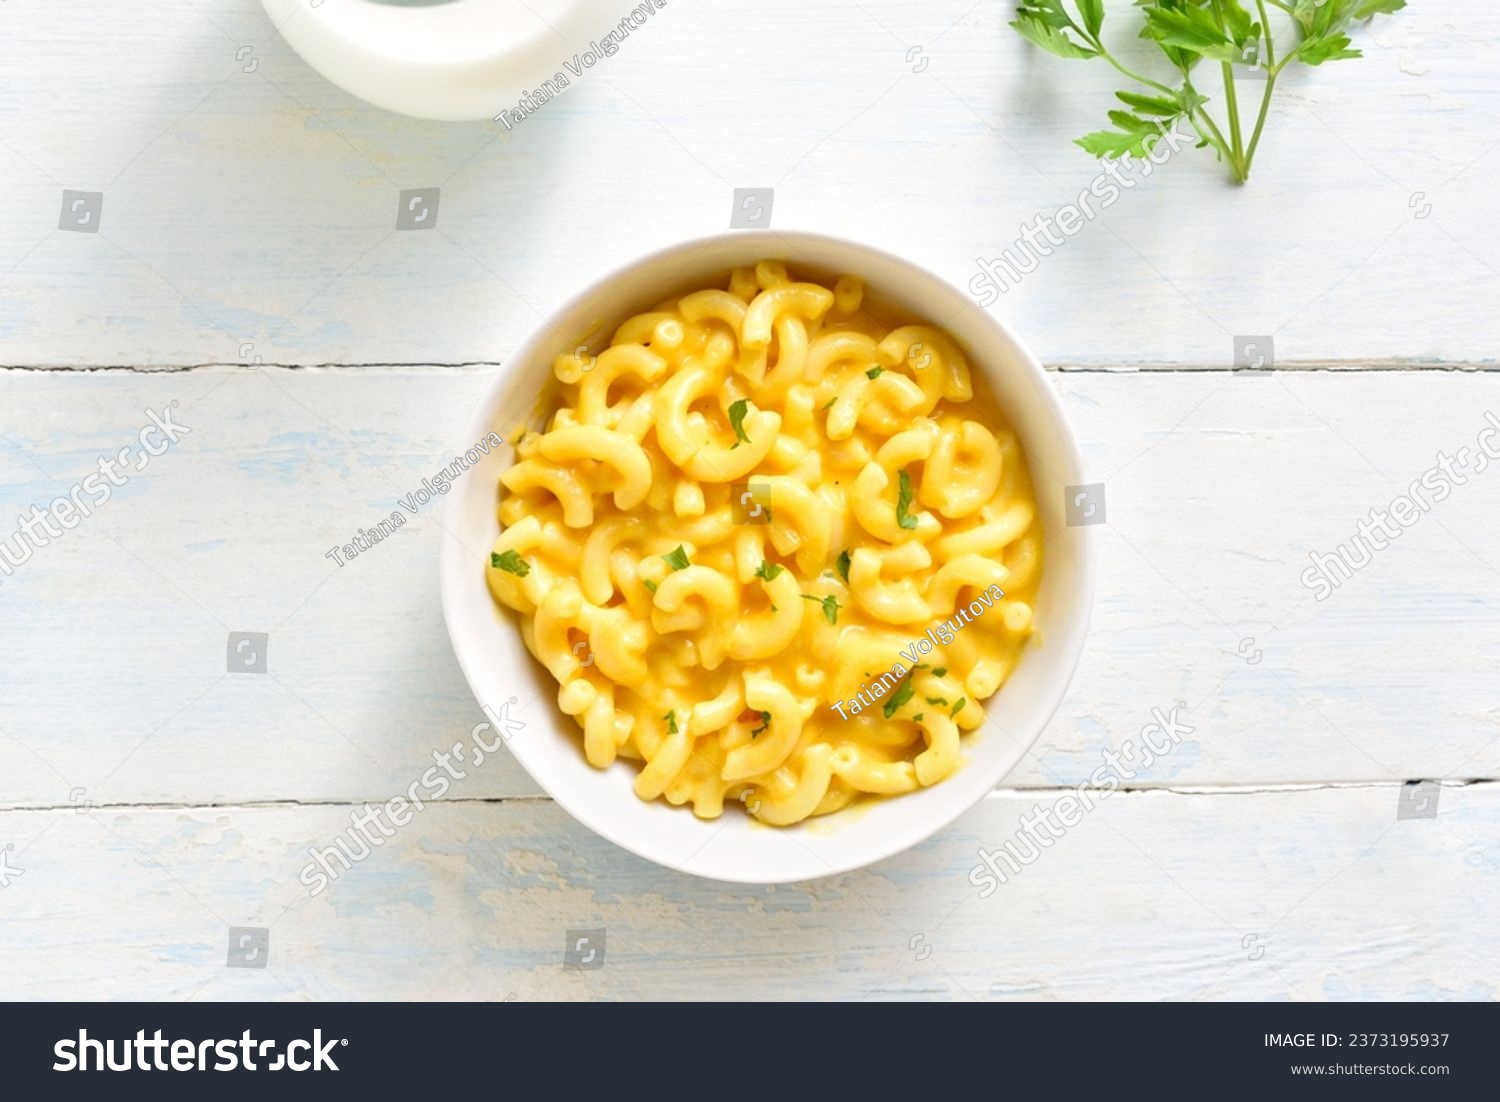 Macaroni and cheese in bowl over wooden background. Top view, flat lay #2373195937